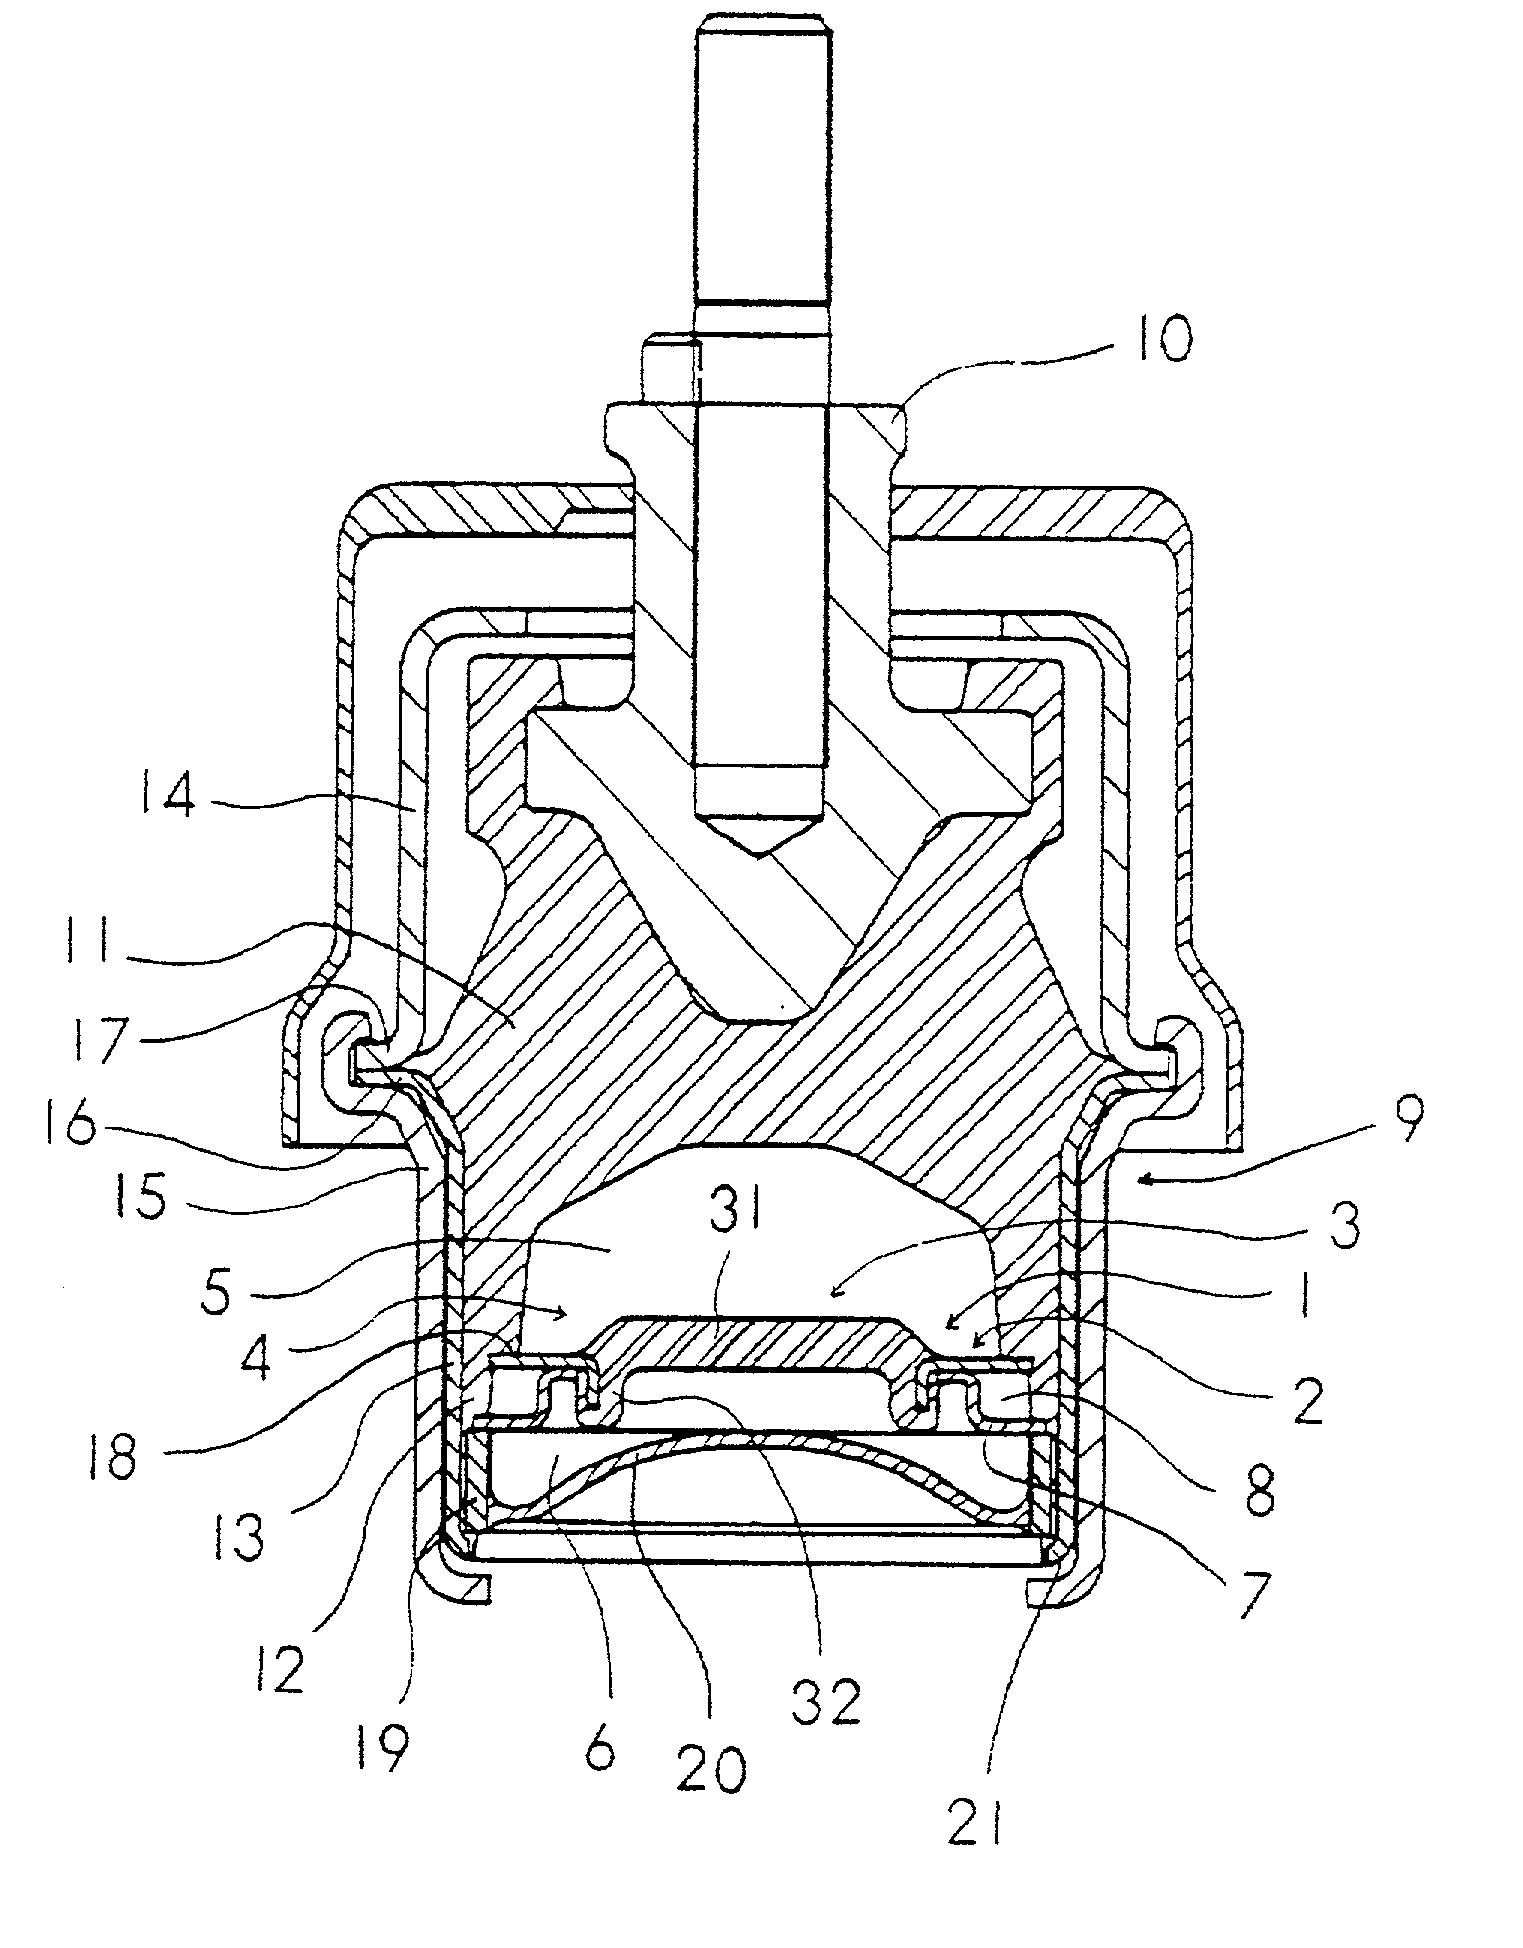 Partition member of liquid filled vibration isolating device